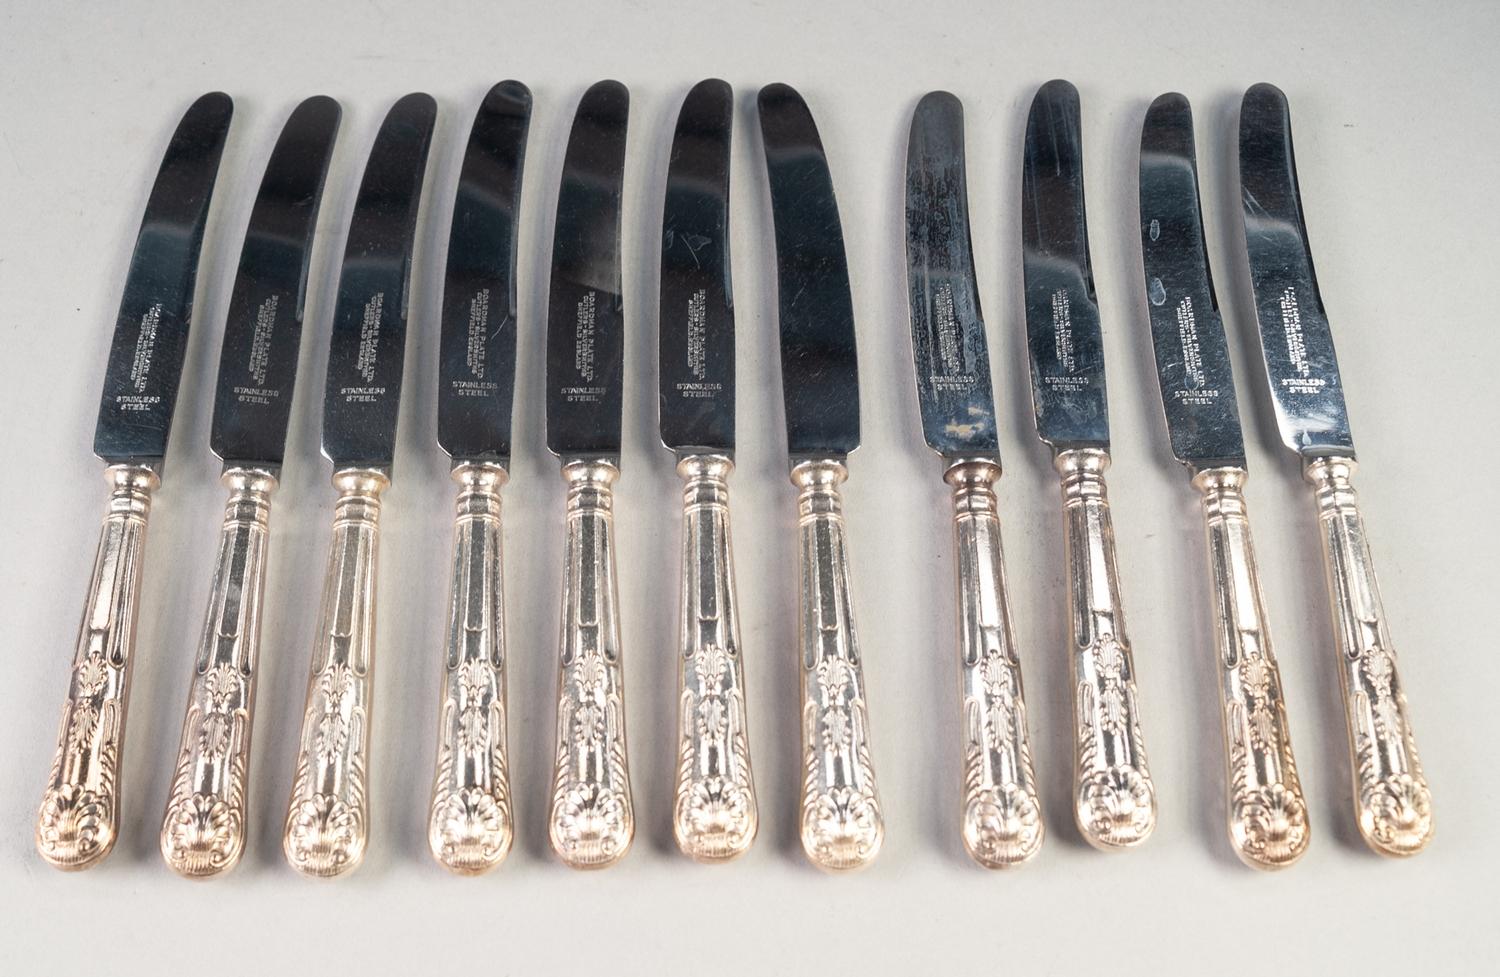 SET OF TWELVE BOARDMAN PLATE KINGS PATTERN DESSERT KNIVES, with stainless blades (12) - Image 2 of 2